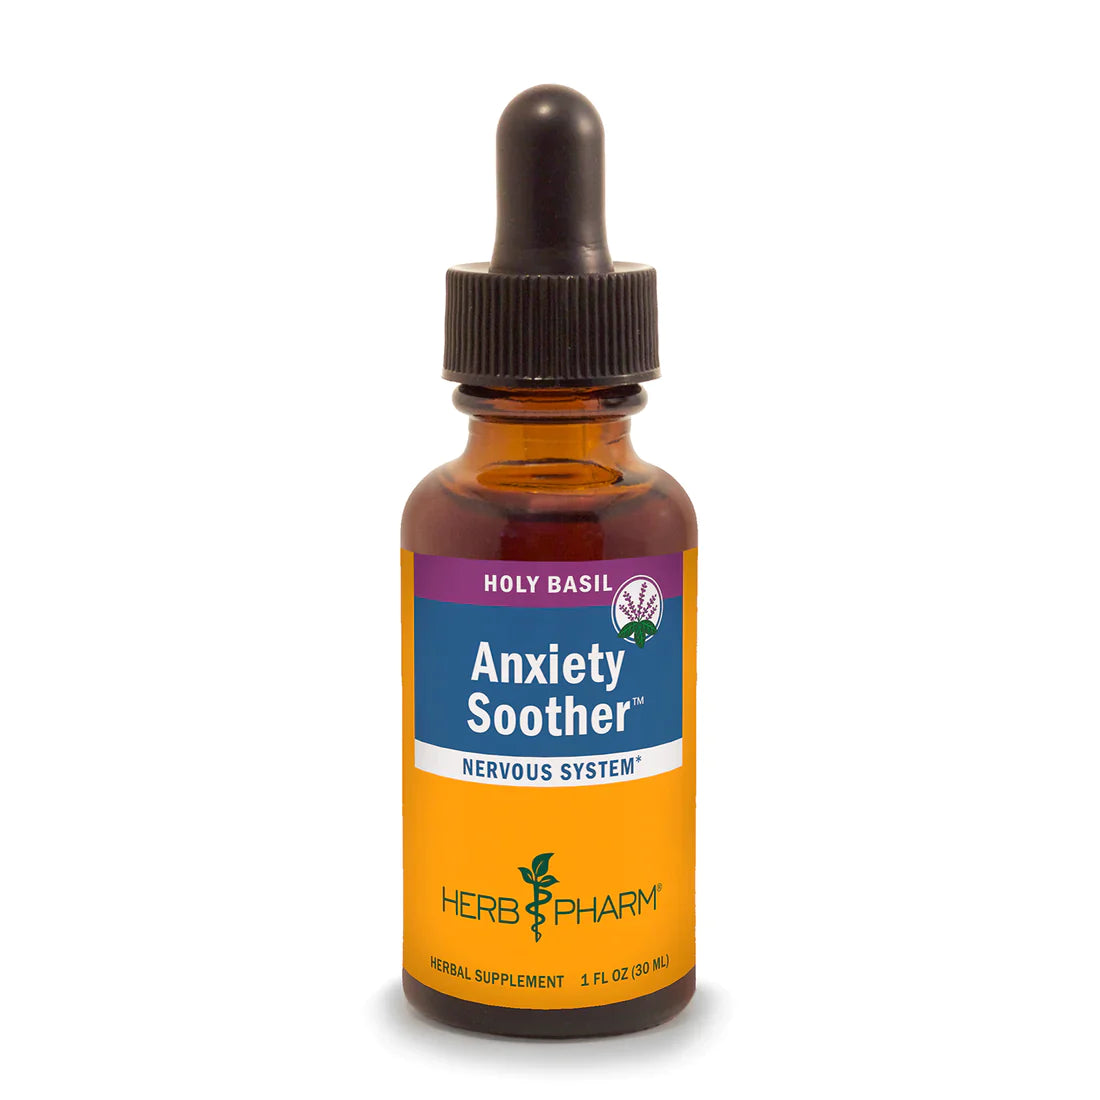 Herb Pharm Anxiety Soother Holy Basil 1oz